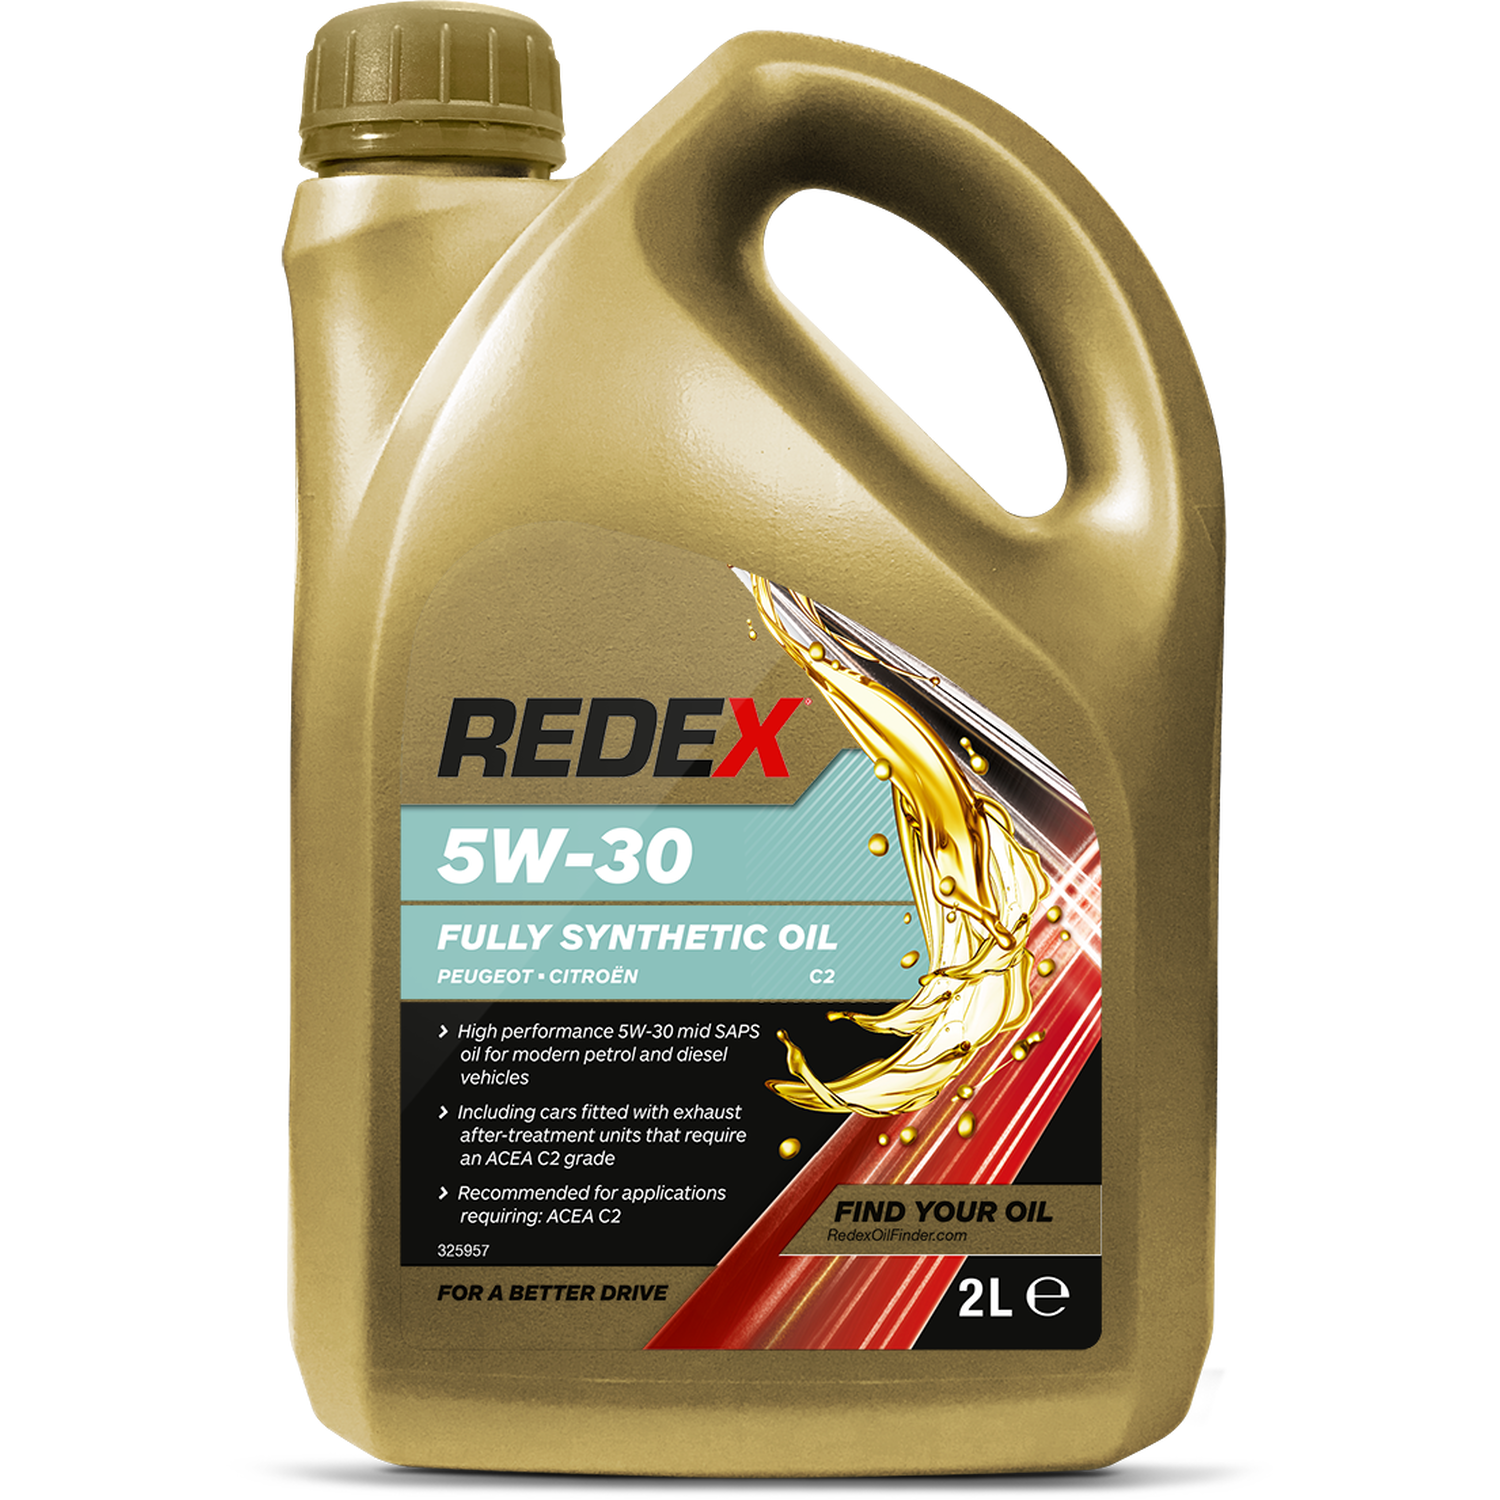 Redex 5W30 Fully Synthetic Oil 2L Image